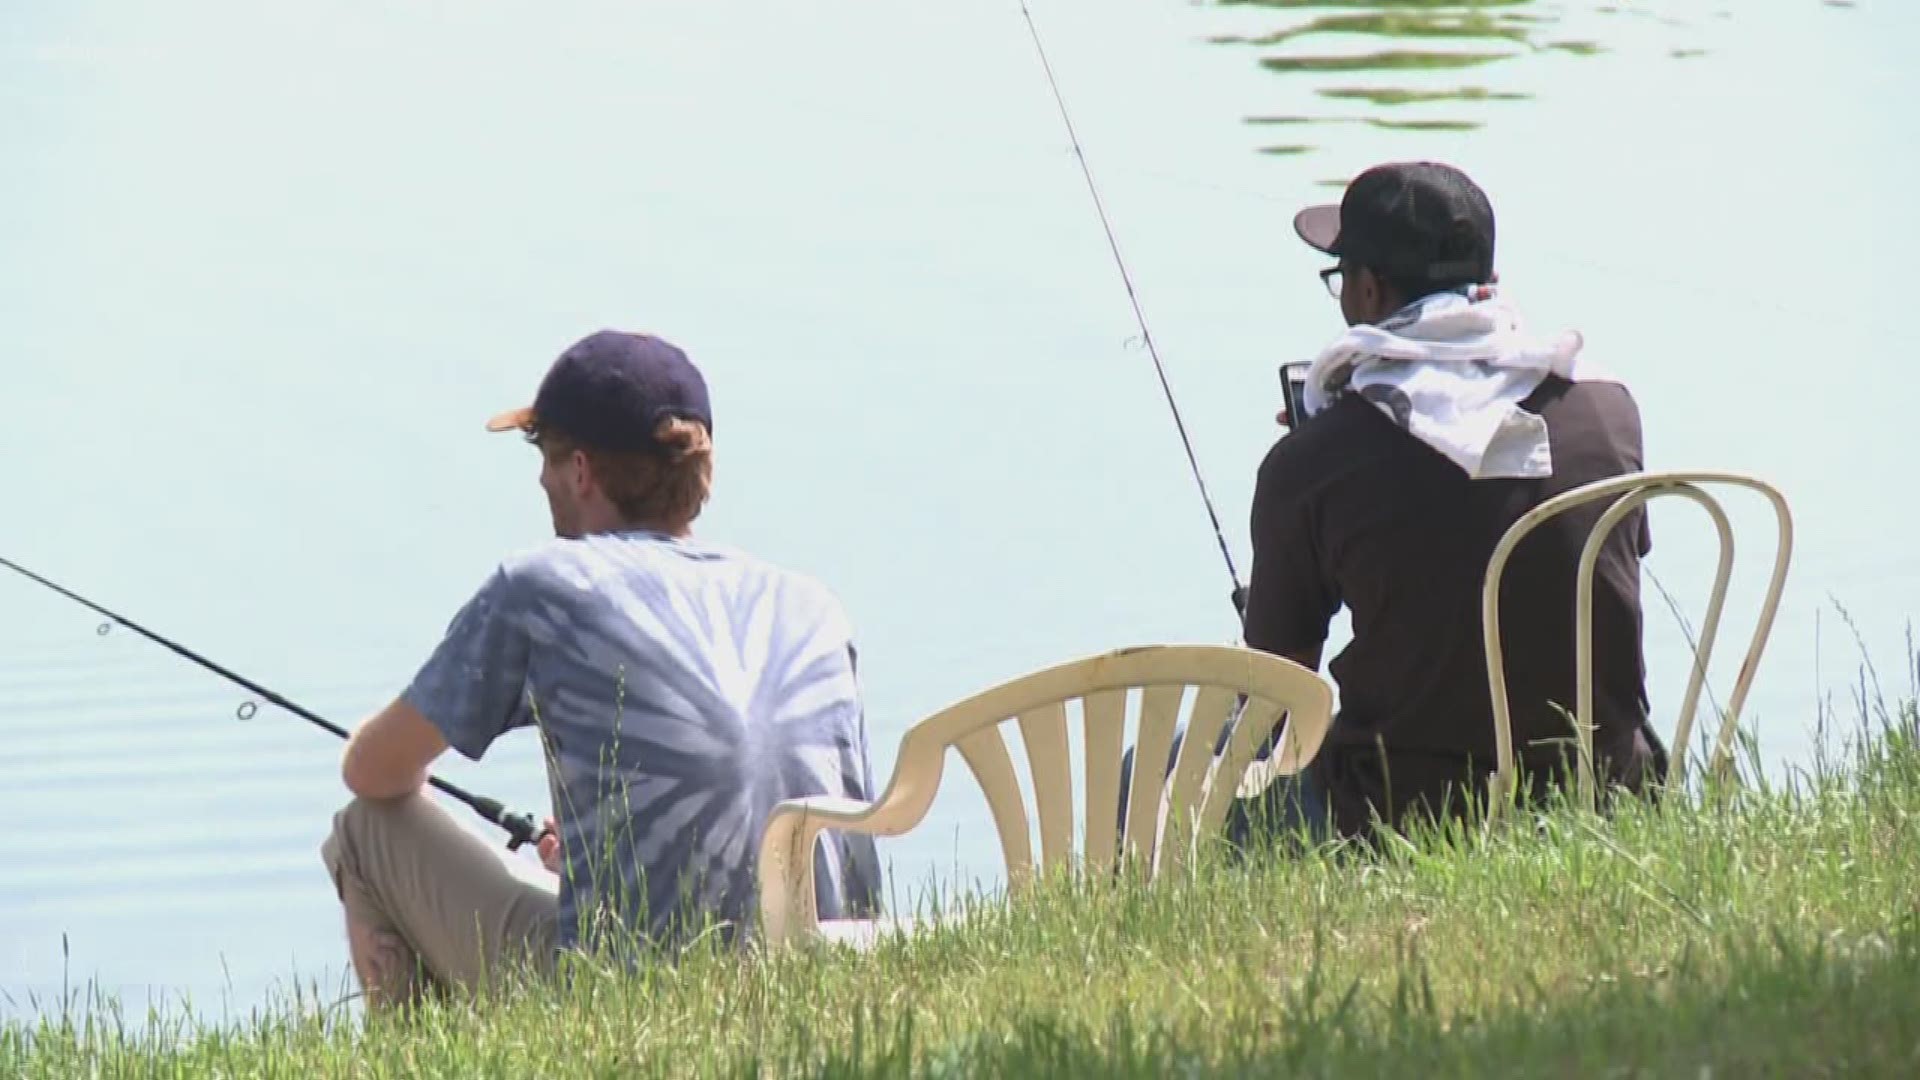 On Saturday, June 8 --  kids and adults in Tennessee can fish without a license. Plenty of kids fishing events have been scheduled across the state, so the day is an excellent way to spend some quality time with the kids and introduce them to the fishing.